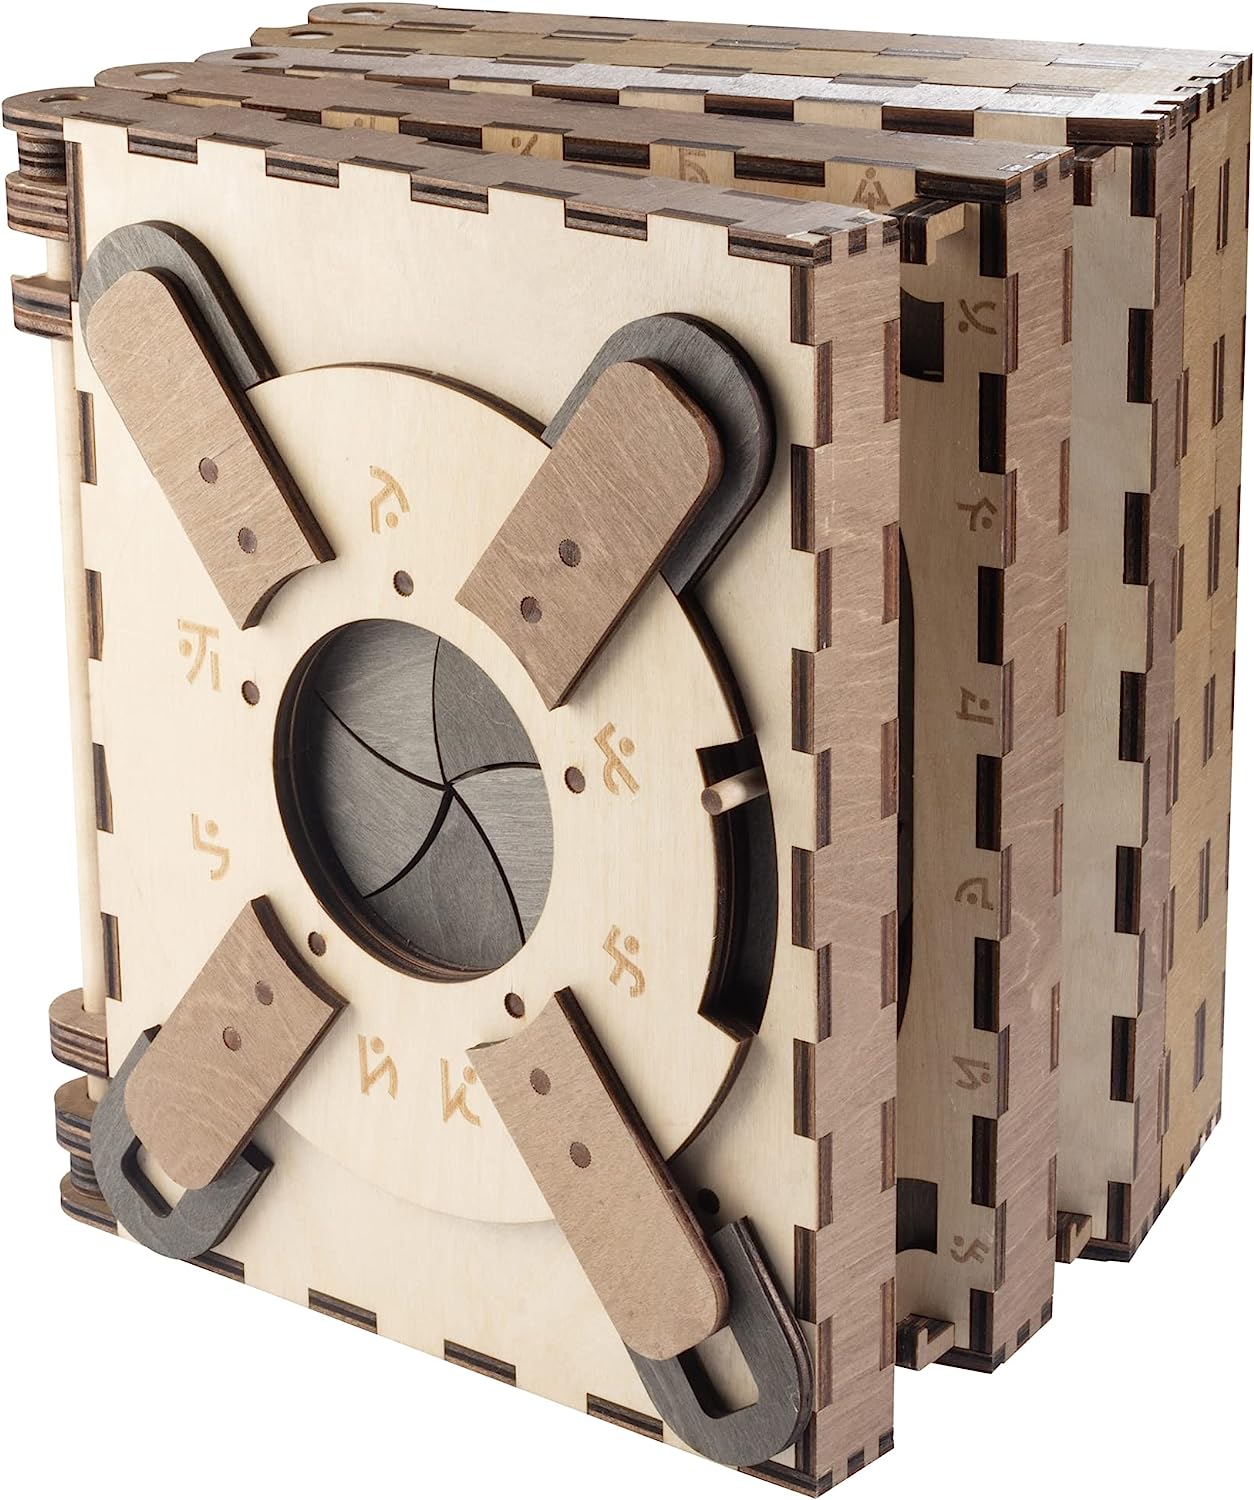 The Original Codex Silenda - The Build Your Own 3D DIY Mechanical Wooden Puzzle Book - Can You Unlock Each Page to Open The Next? Amazing Davinci Brain Challenge Puzzle Box for Teens or Adults